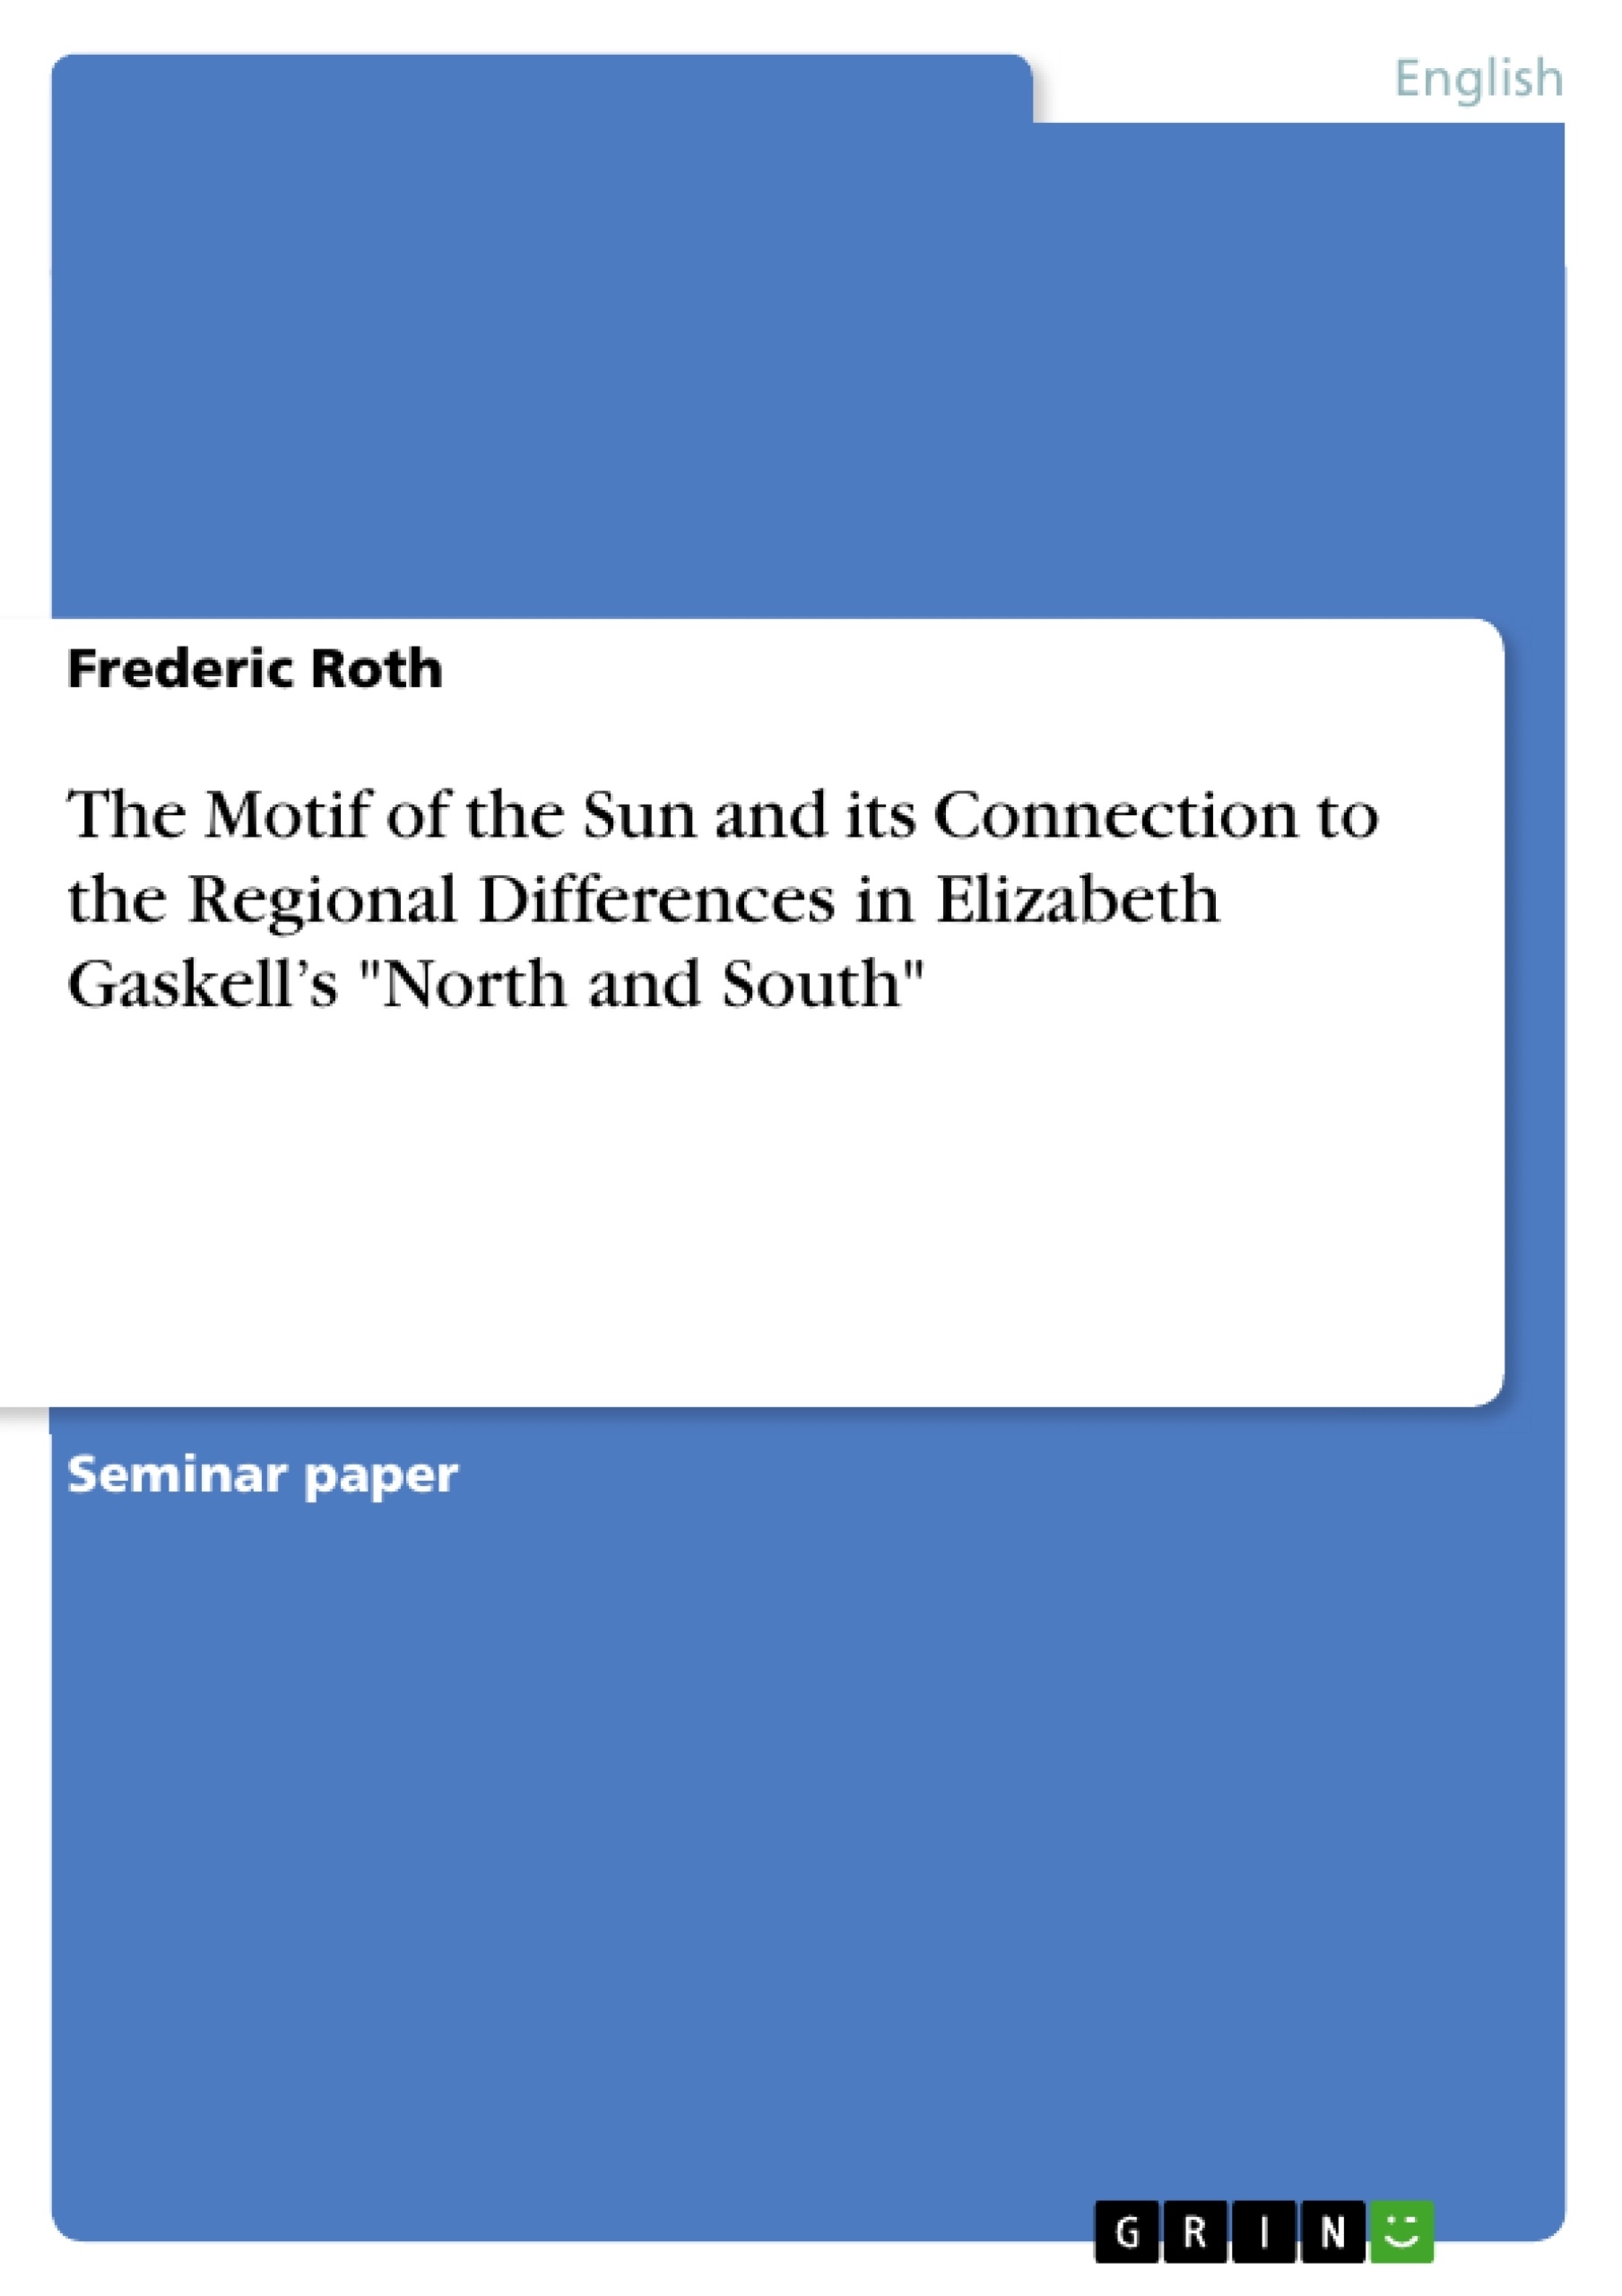 Título: The Motif of the Sun and its Connection to the Regional Differences  in Elizabeth Gaskell’s "North and South"